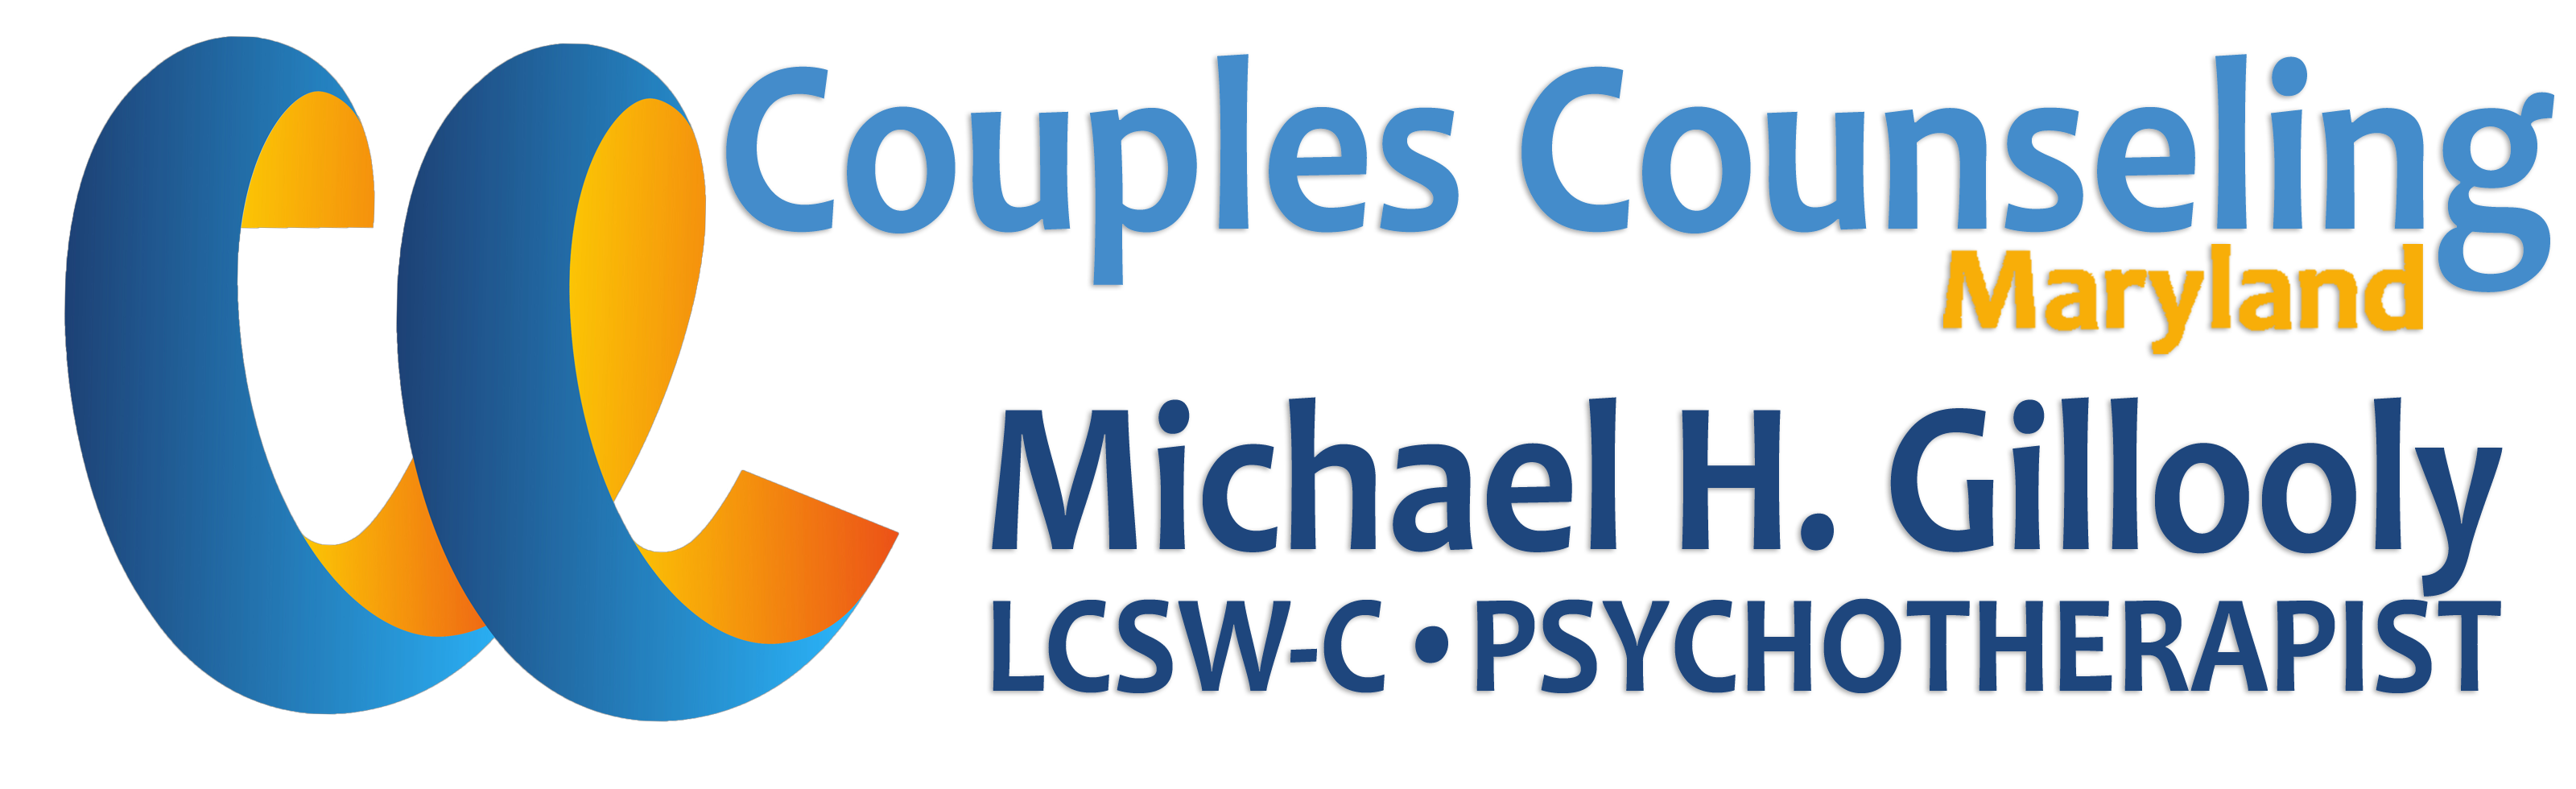 COUPLES COUNSELING Maryland